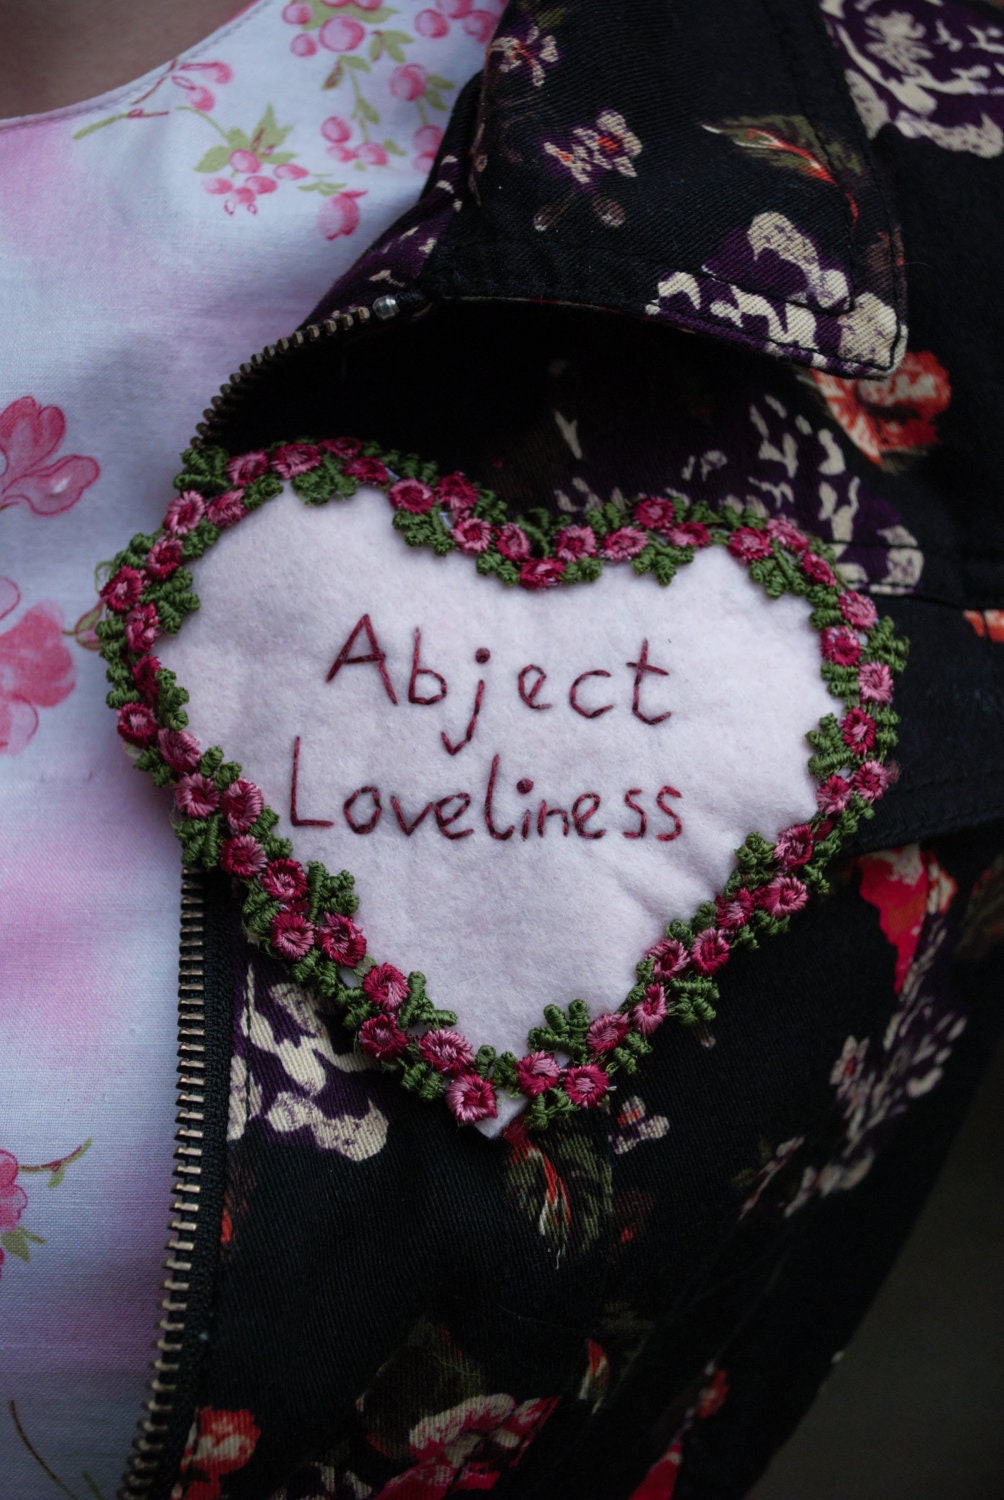 Abject Loveliness - Floral Heart Shaped Embroidered Felt Brooch